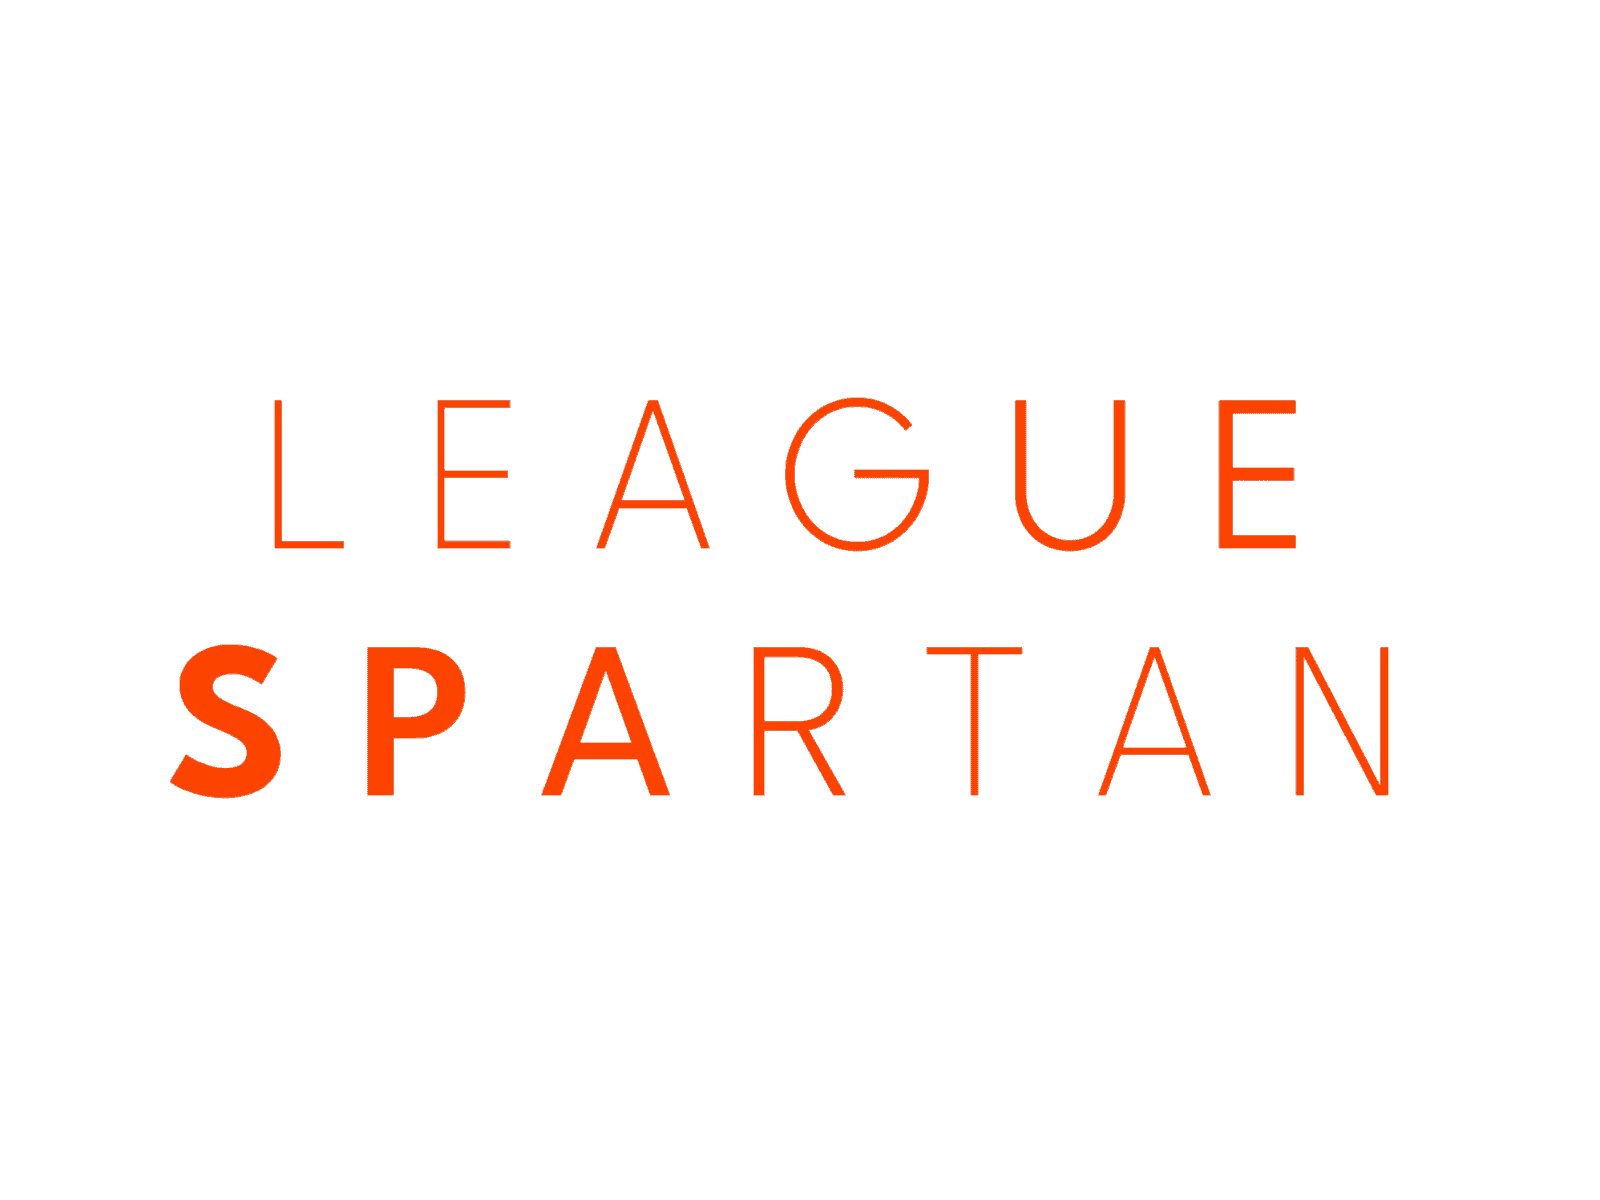 League Spartan Variable by Ty Finck on Dribbble